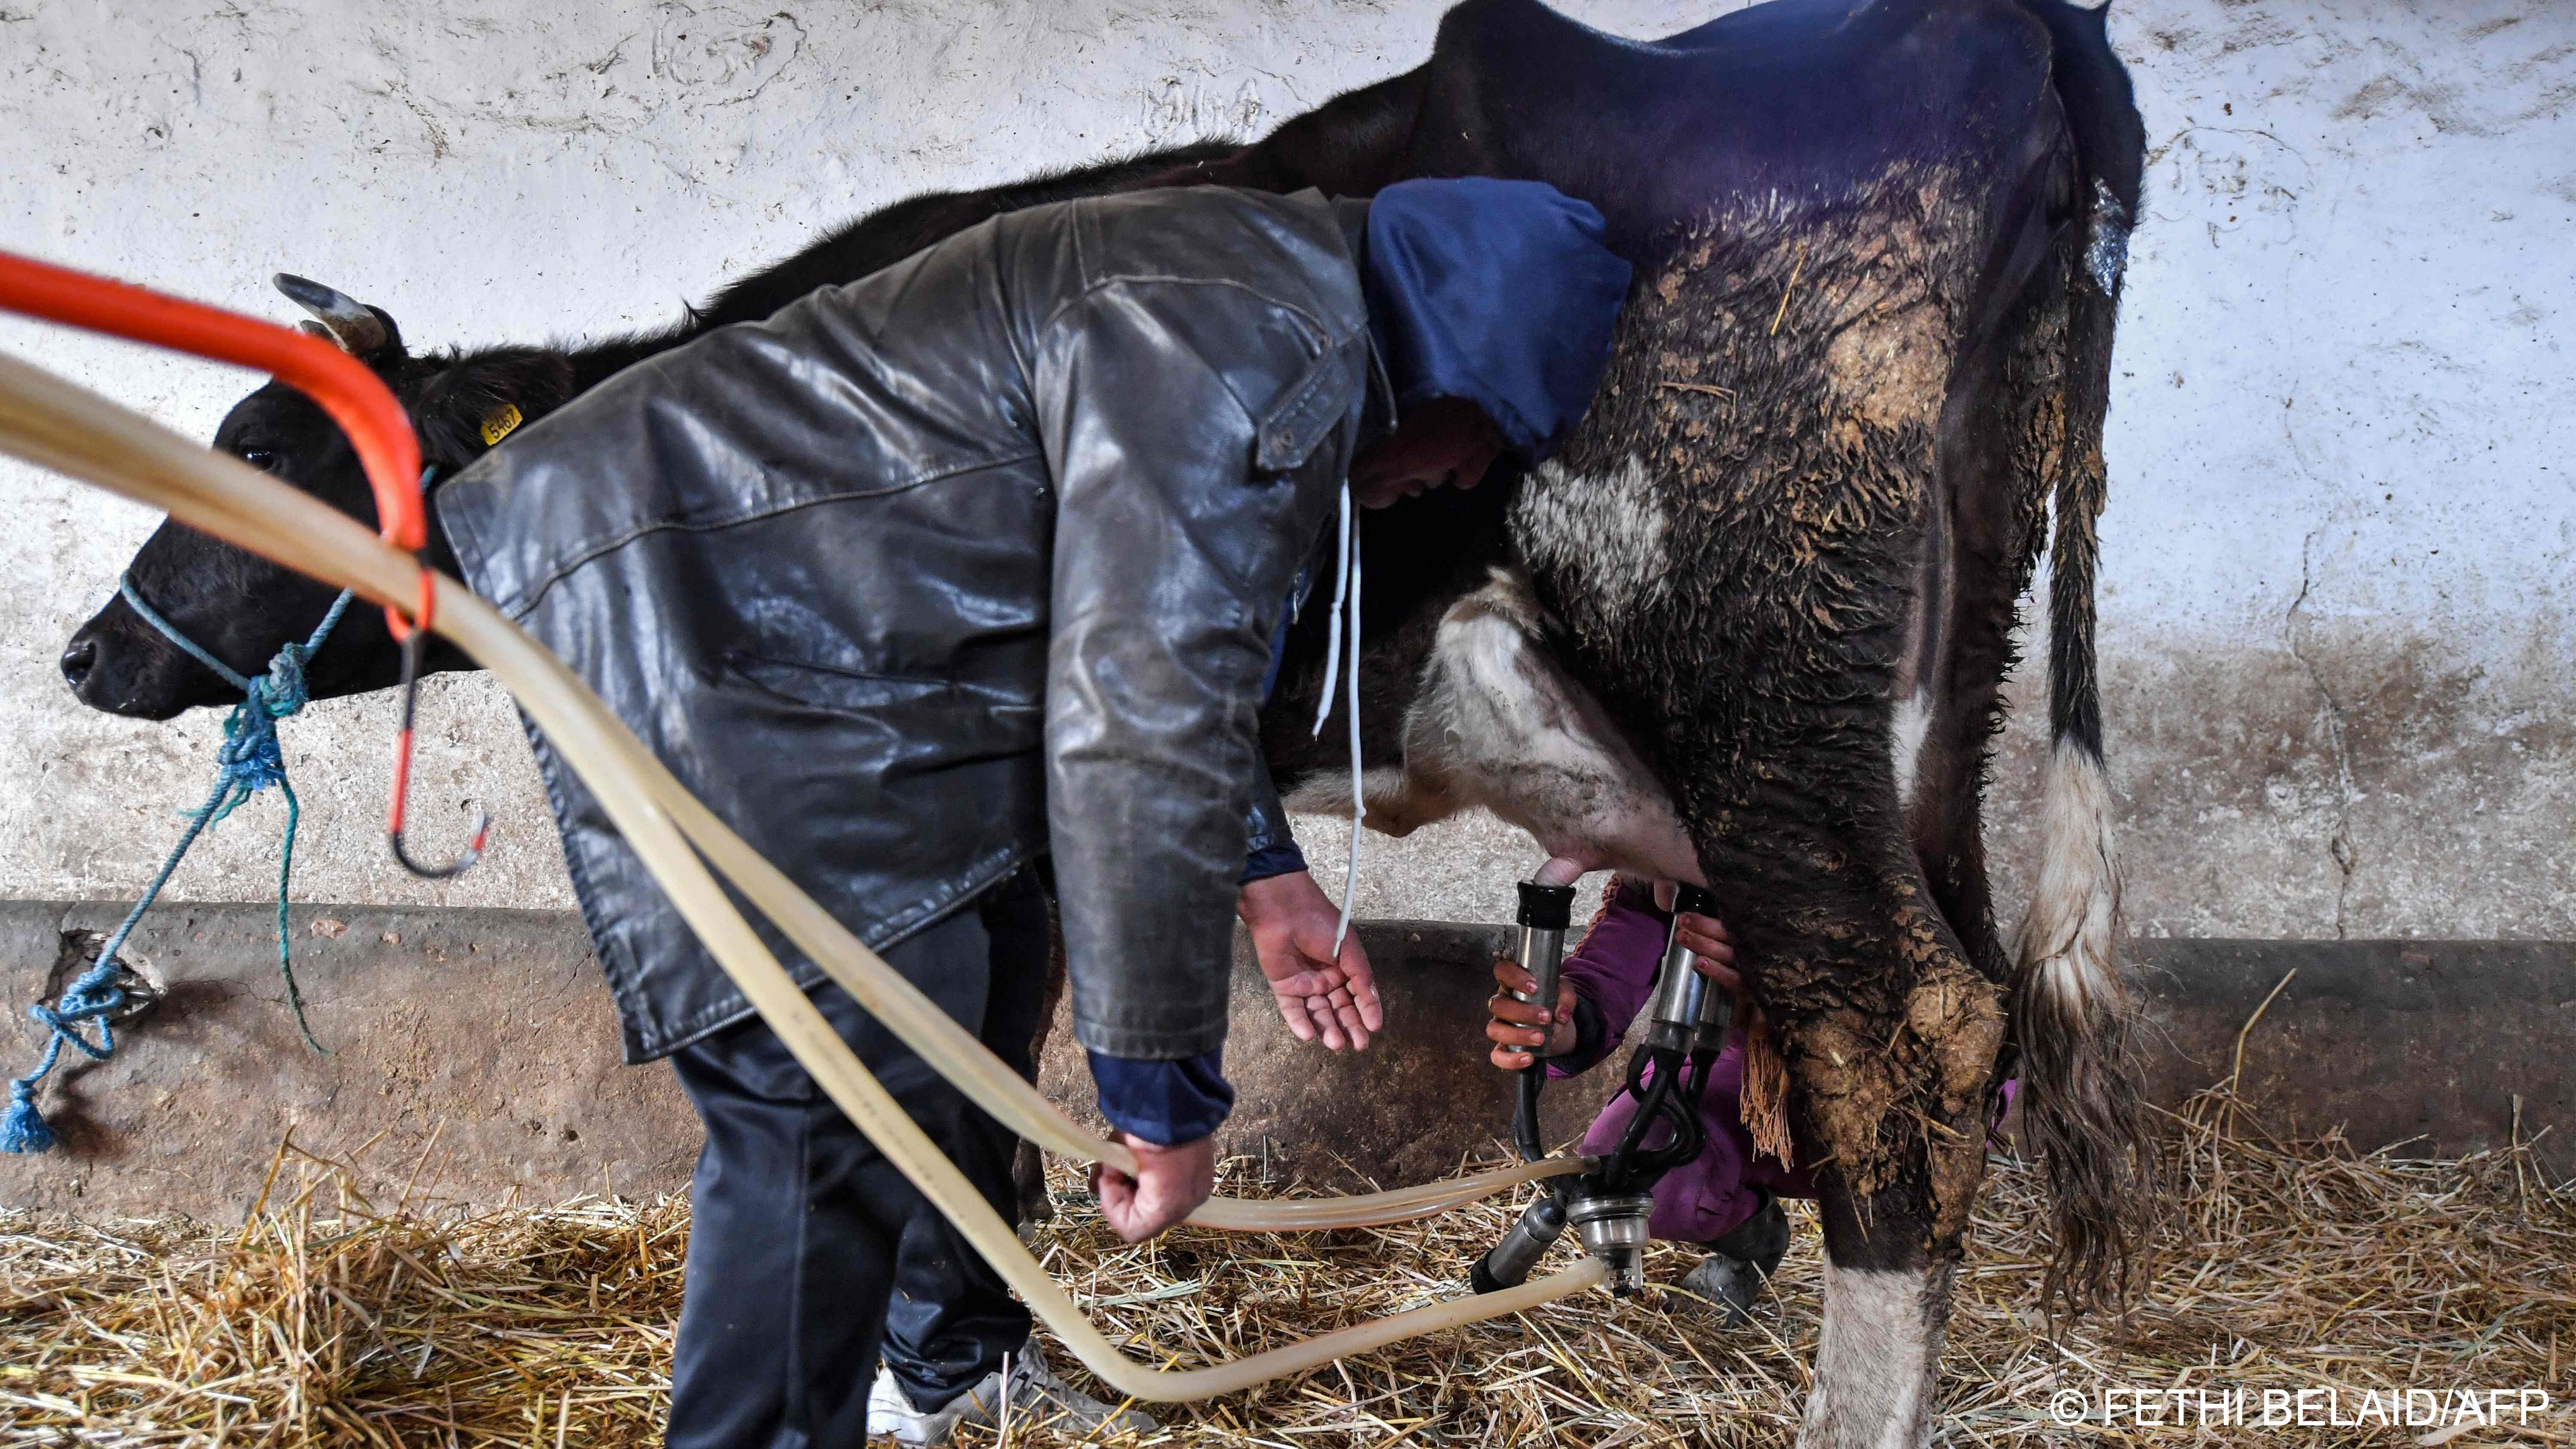 Farmer Mohamed Gharsallaoui looks on as a farmer attaches suction milking hoses to the teats of a cow at a small farm in the town of el-Batten, about 35 kilometres west of Tunisia‘s capital, on 20 January 2023 (image: FETHI BELAID/AFP) 